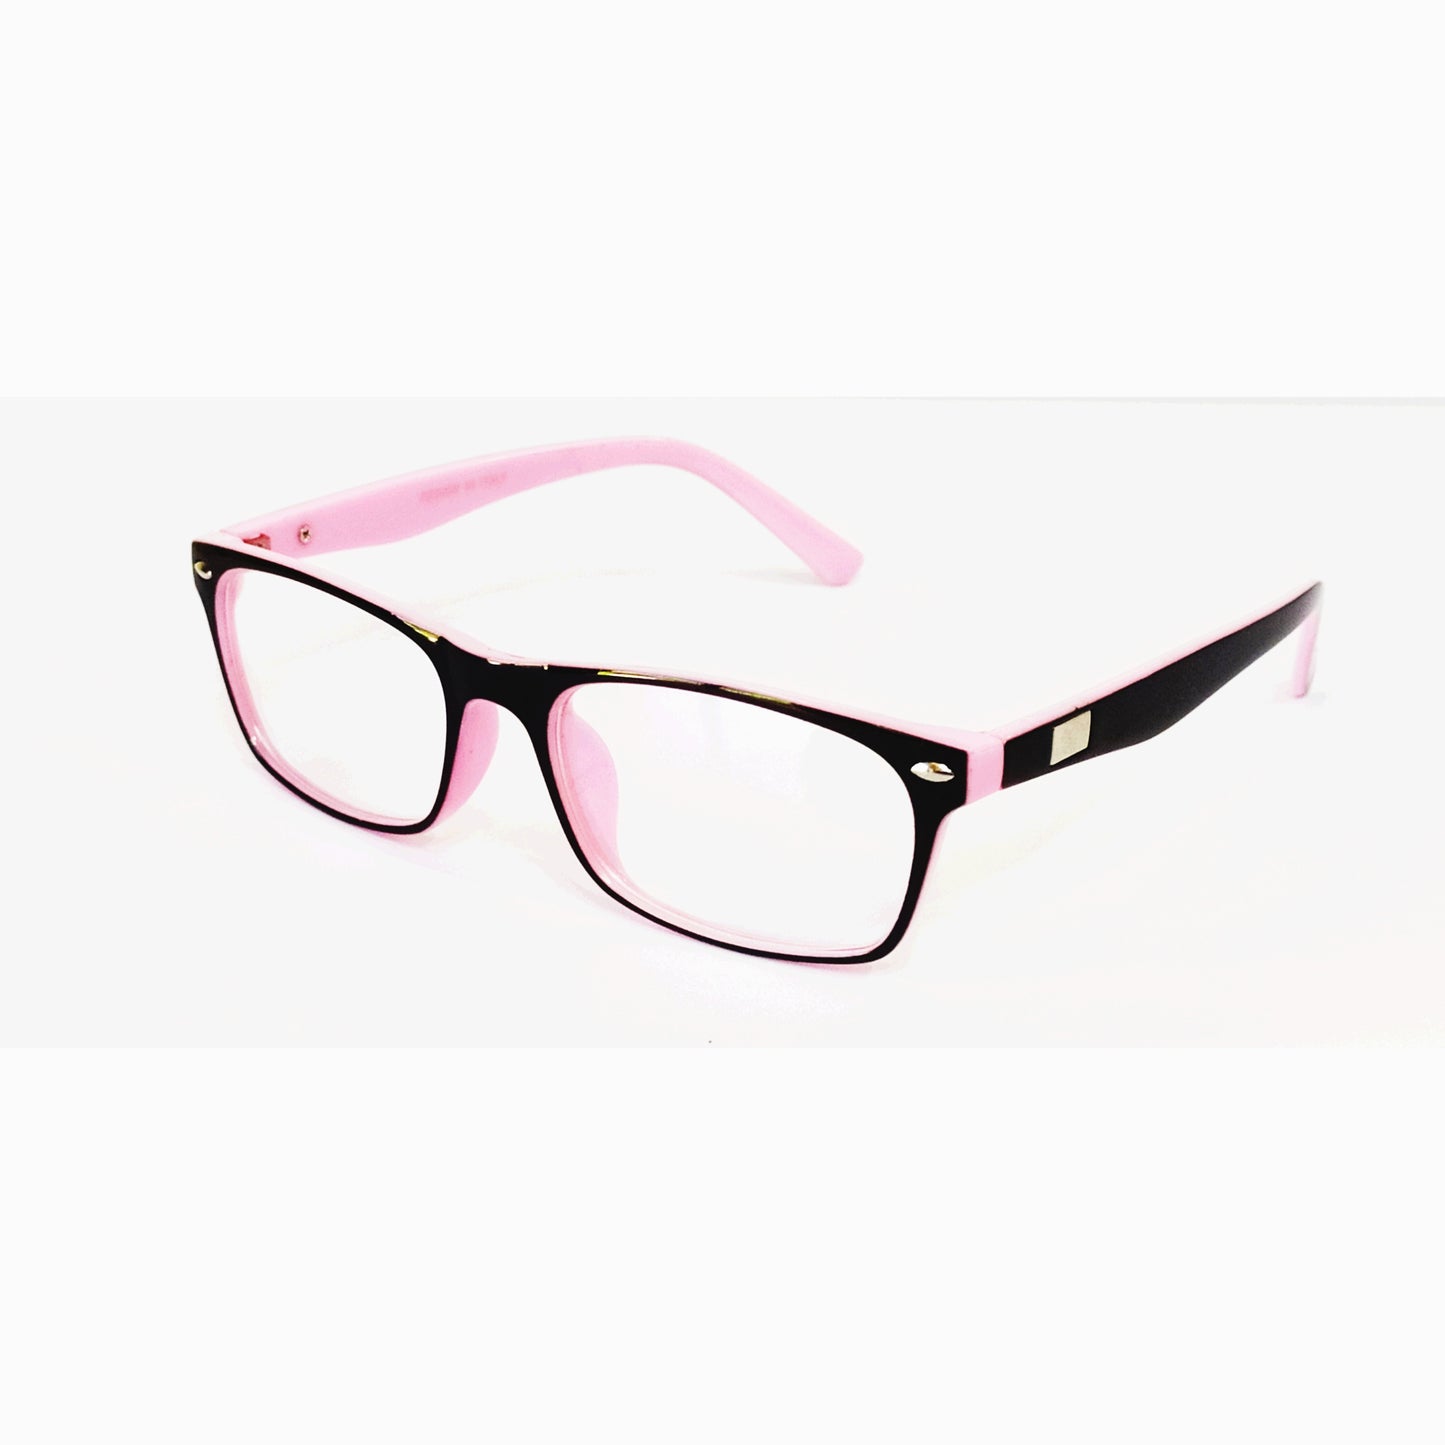 Kids Spectacle Frame Glasses with Zero Power Lens